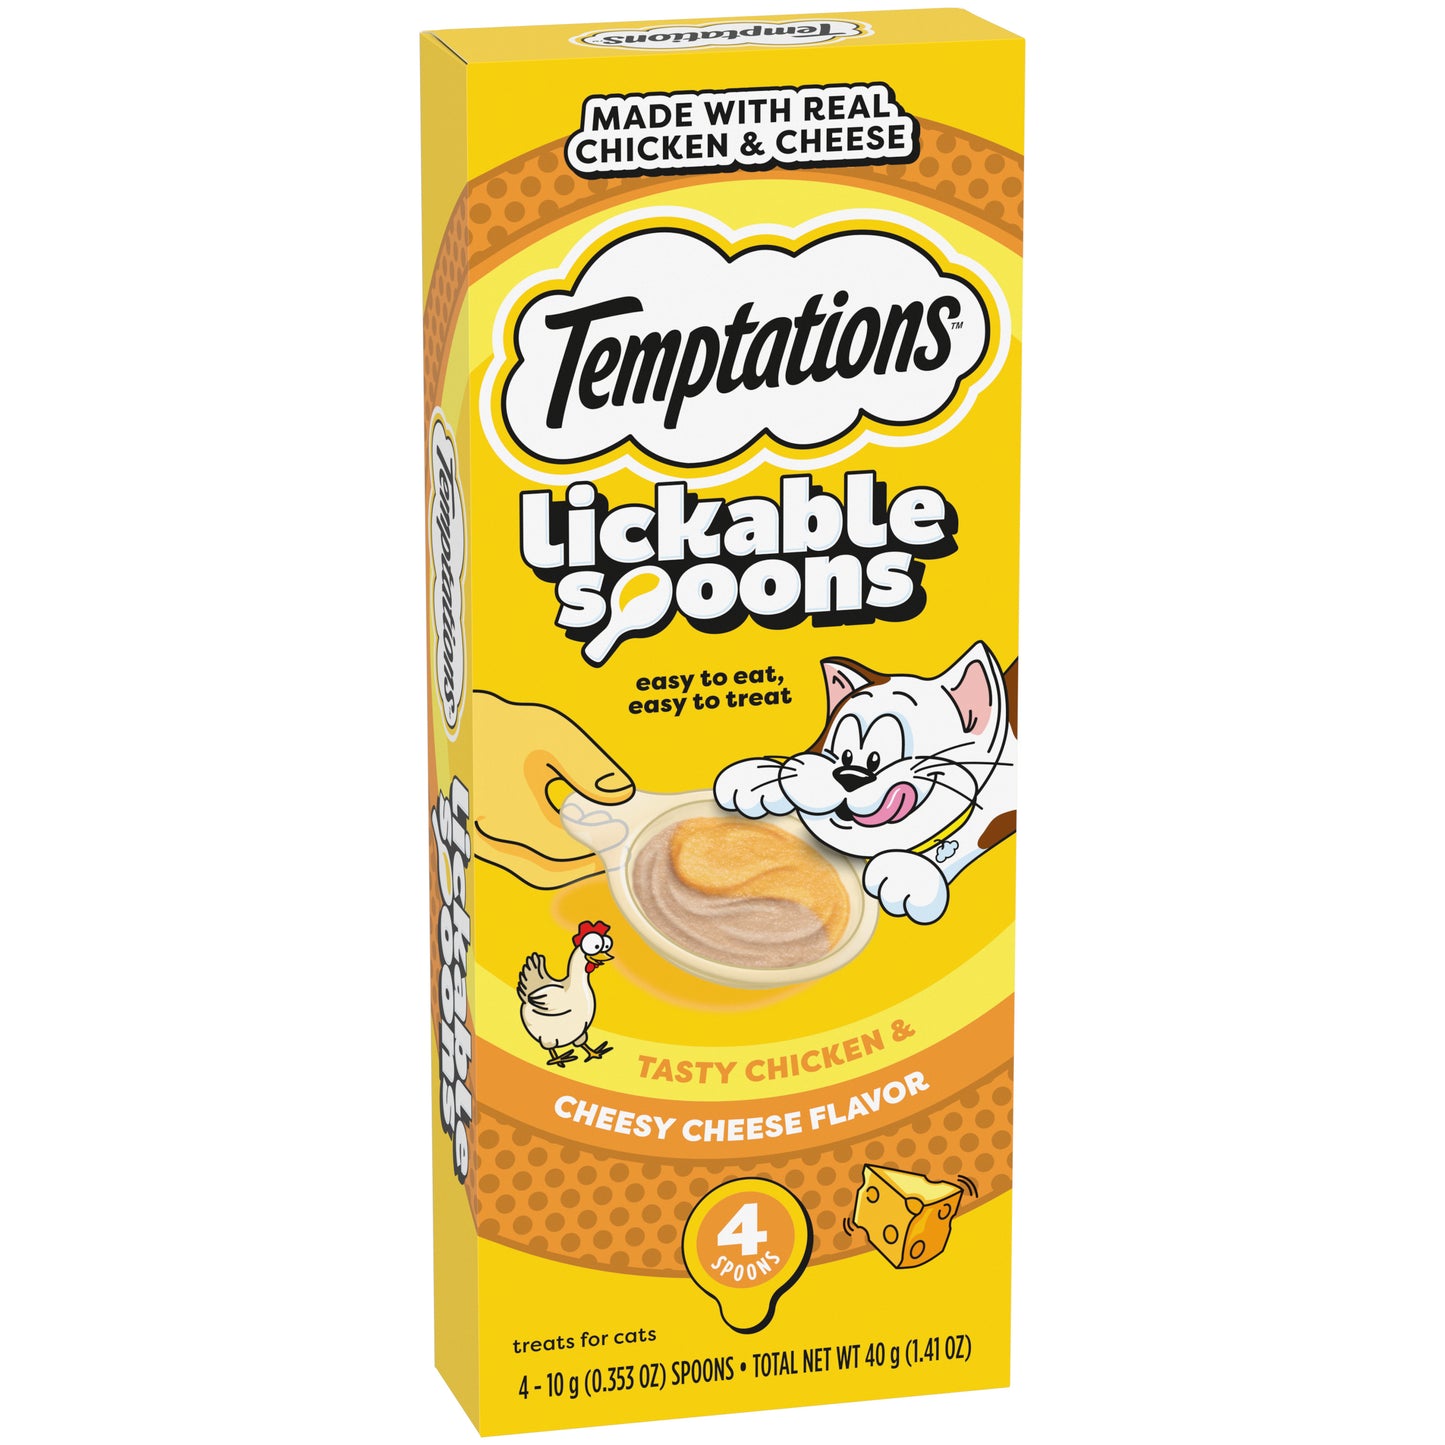 [Temptations][Temptations Lickable Spoons, Tasty Chicken and Cheesy Cheese, Pack of 4][Image Center Left (3/4 Angle)]